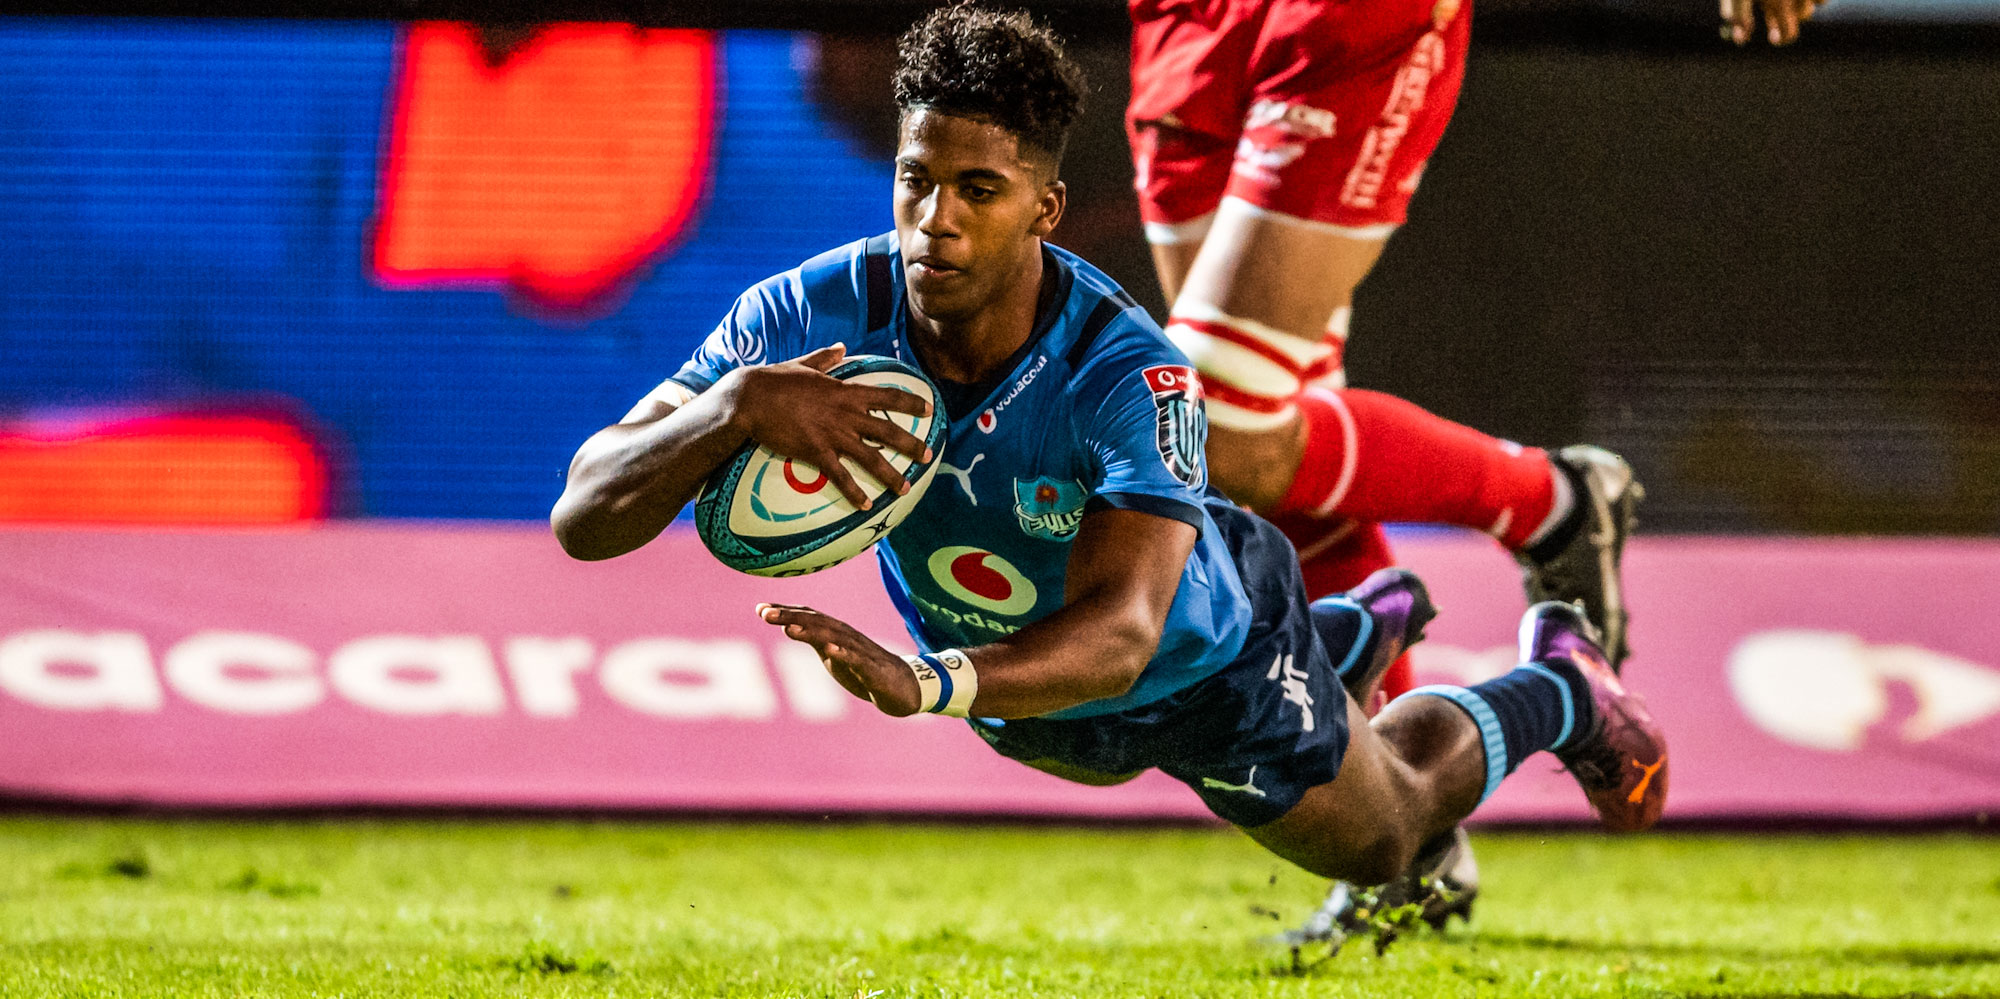 Canan Moodie is back in the Vodacom Bulls' starting team this weekend.